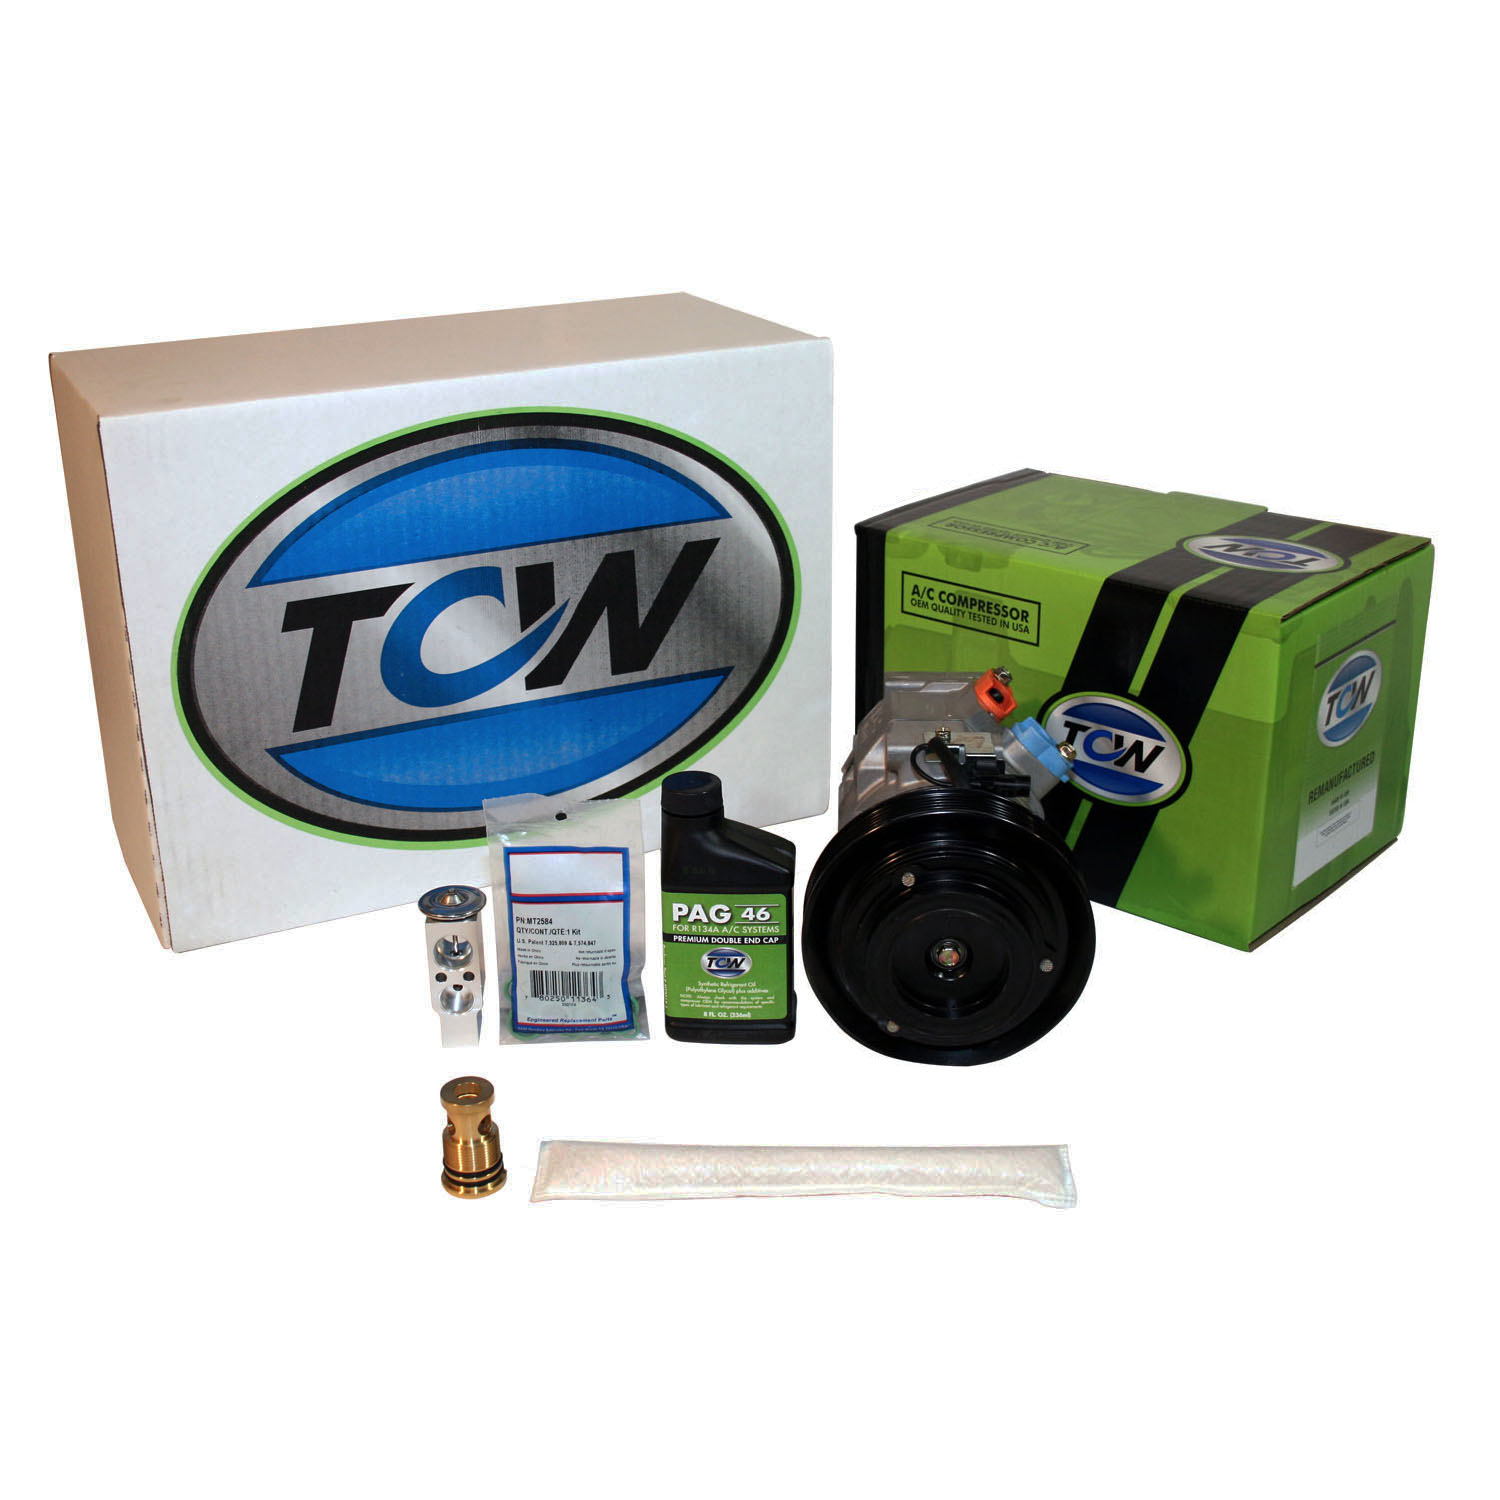 TCW Vehicle A/C Kit K1000269R Remanufactured